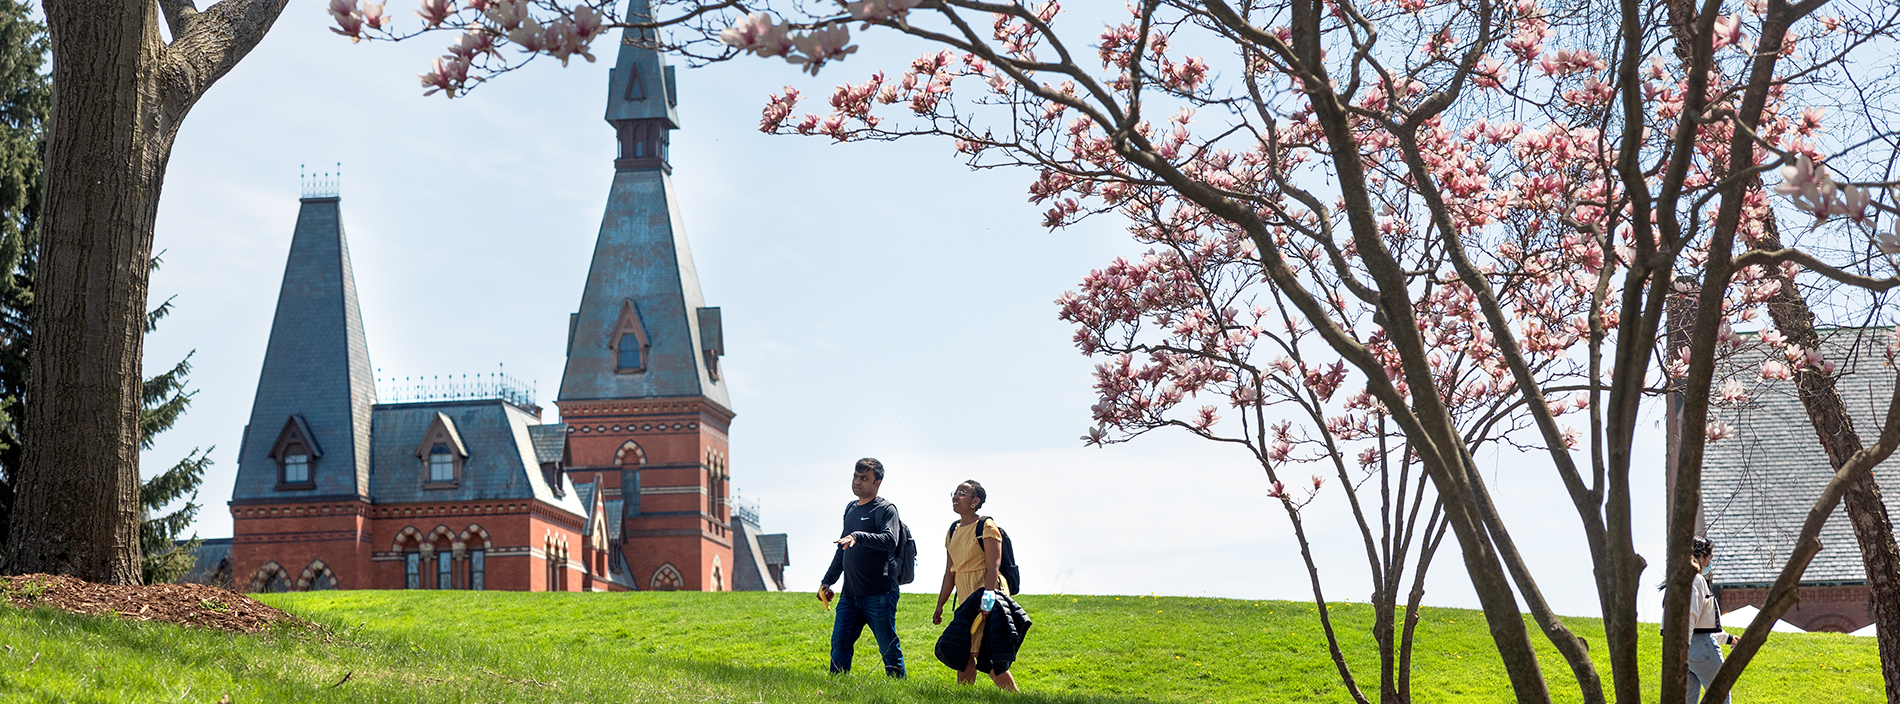 Two people walking across green grass with Sage Hall in the background.